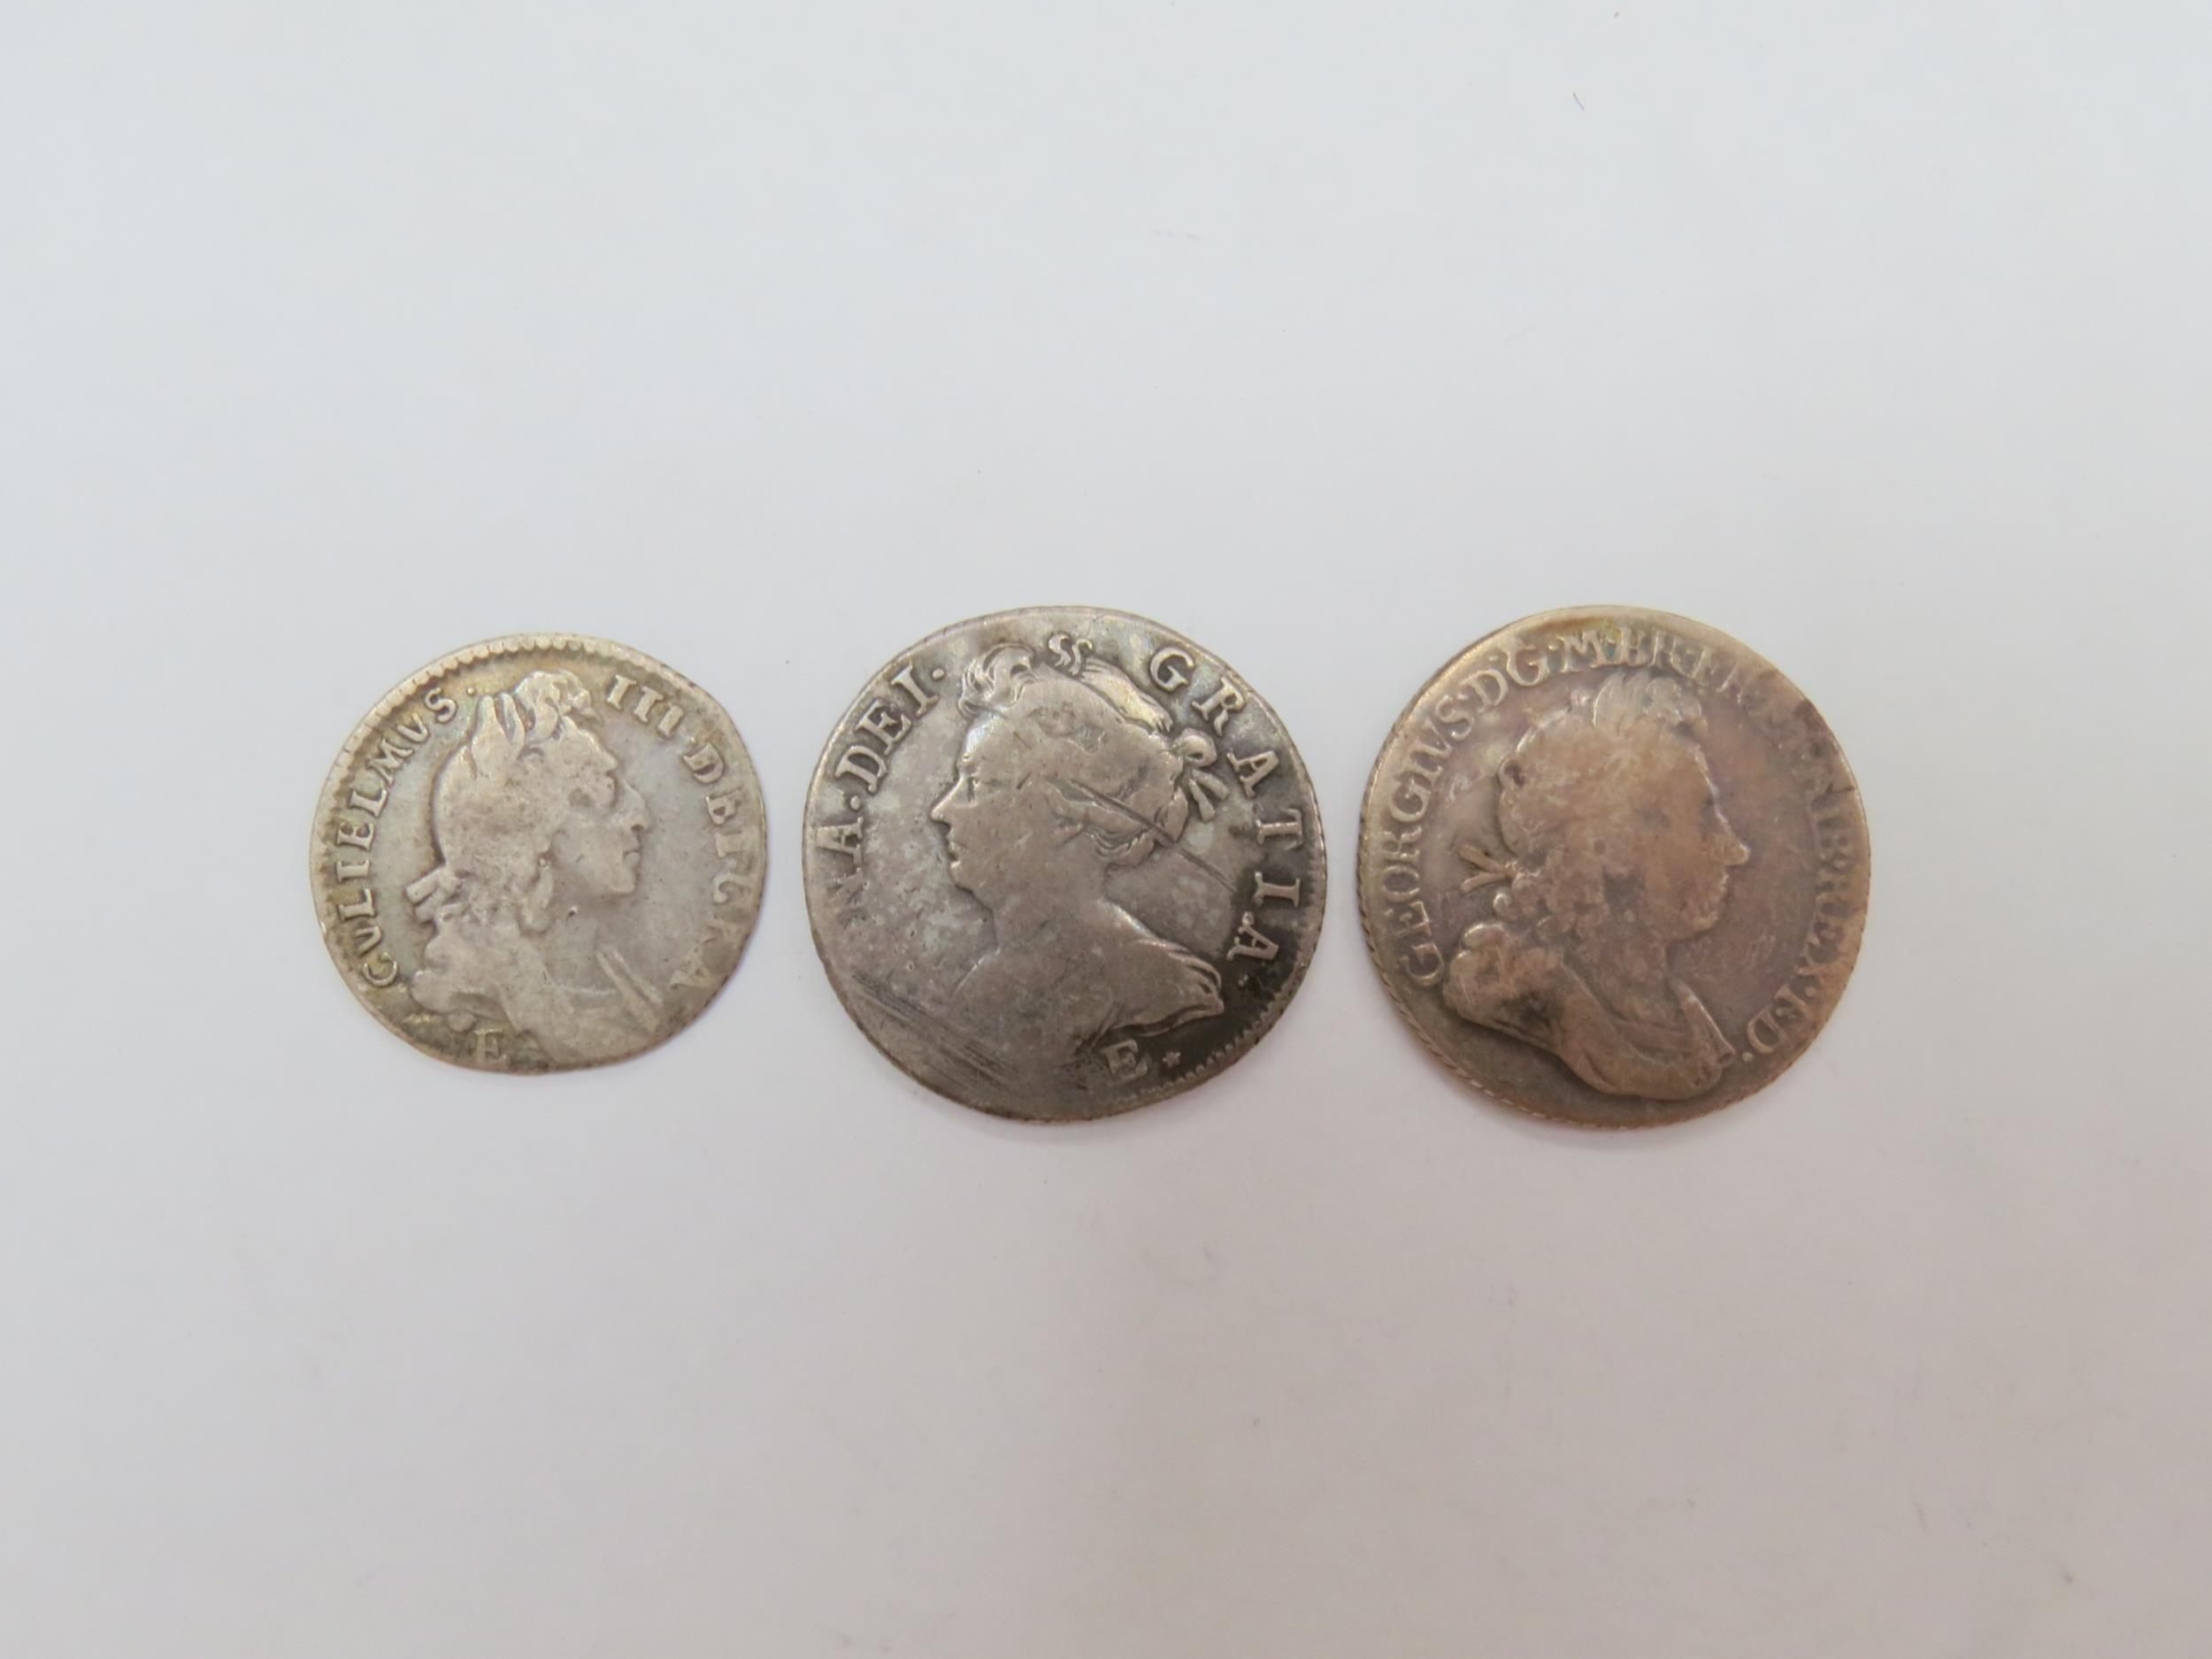 A 1696 William III sixpence, together with shillings of Queen Anne, 1708 & George I, 1720